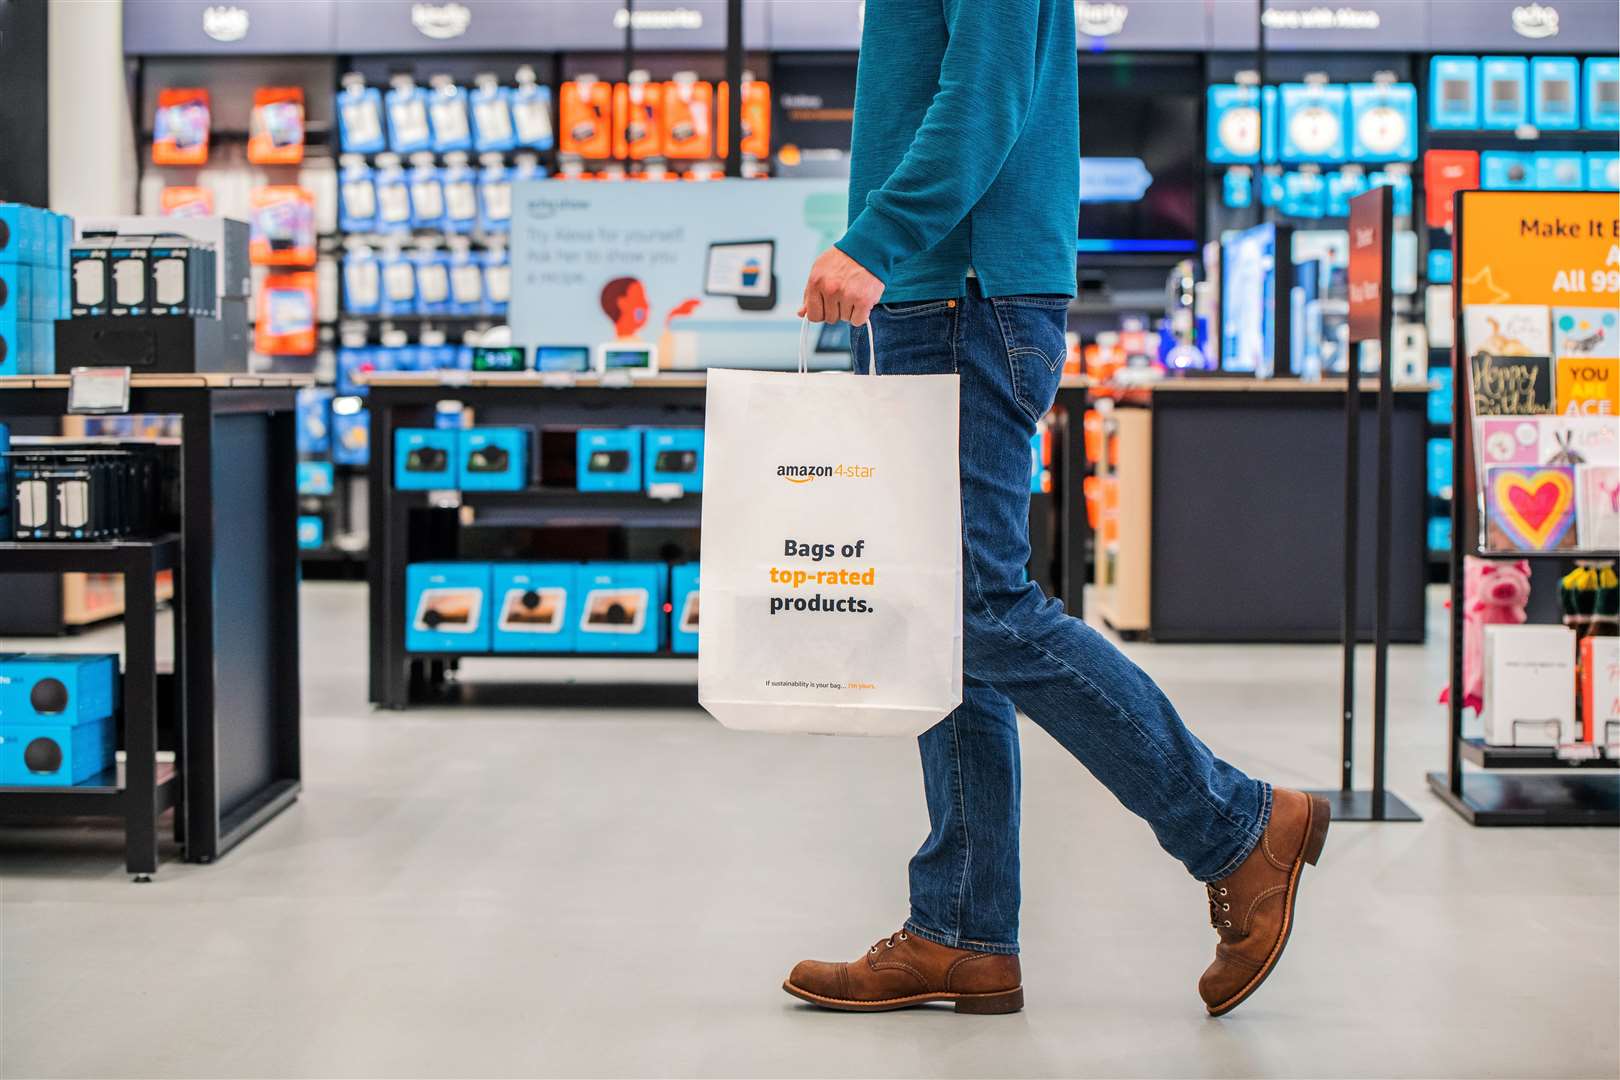 The flagship Amazon 4-Star store at Bluewater shopping centre in Greenhithe is its first in the UK. Photo: Amazon